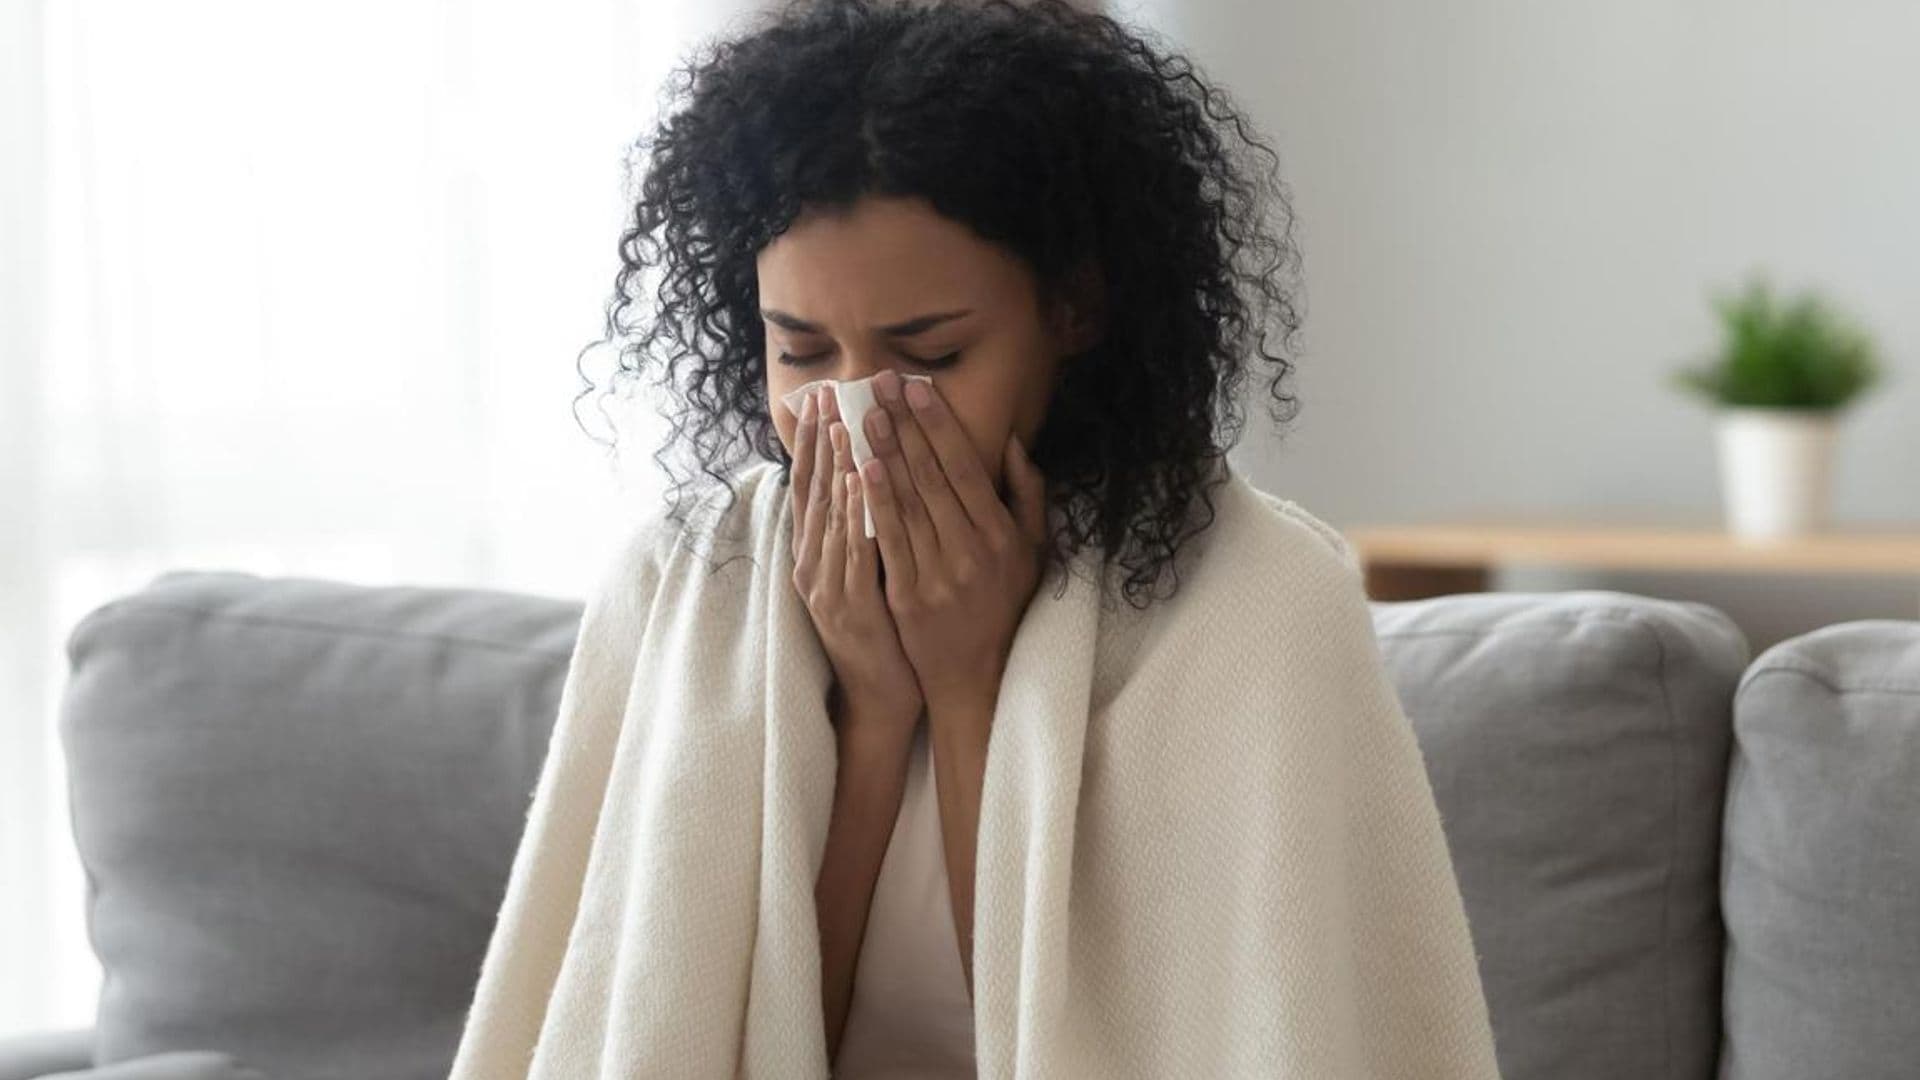 9 natural ways to help increase your body’s defenses and ease cold and flu symptoms